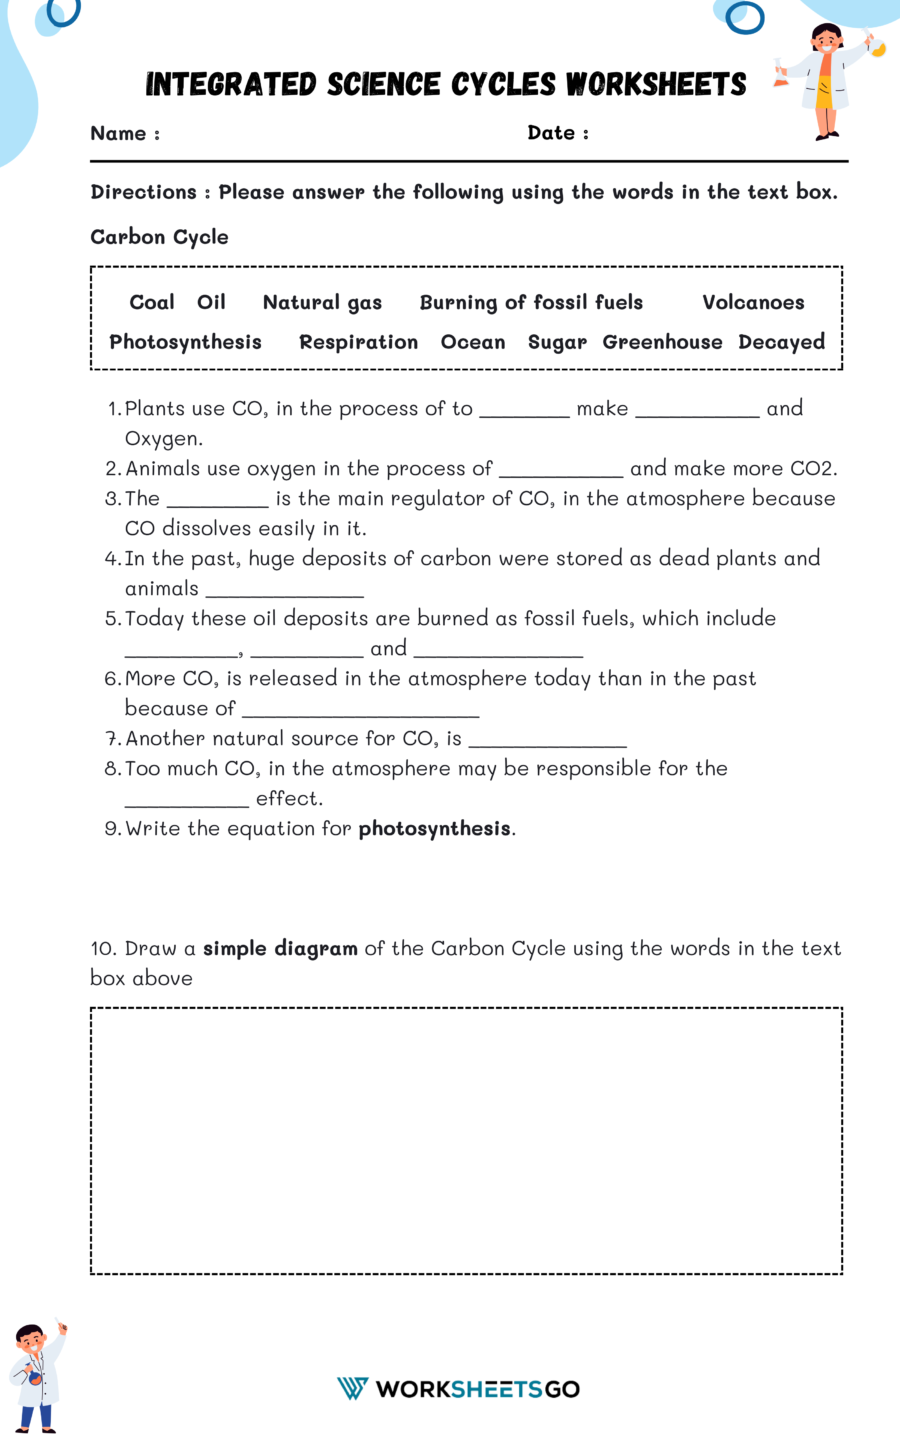 Integrated Science Cycles, Carbon Cycle Worksheet